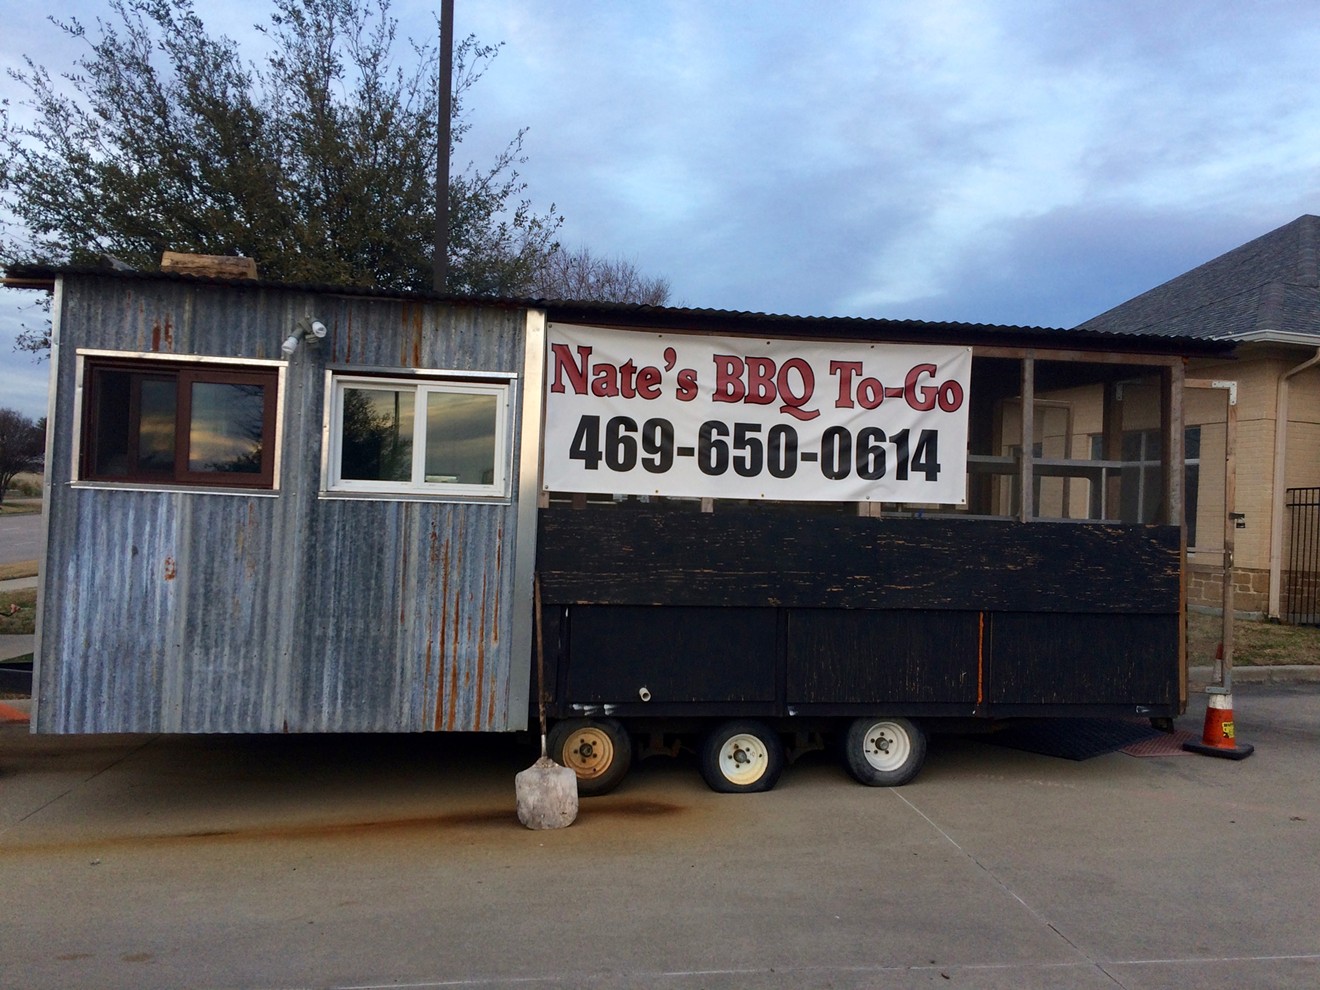 If you happen to see this sign on a trailer while traveling through Carrollton, stop in immediately; killer barbecue awaits.